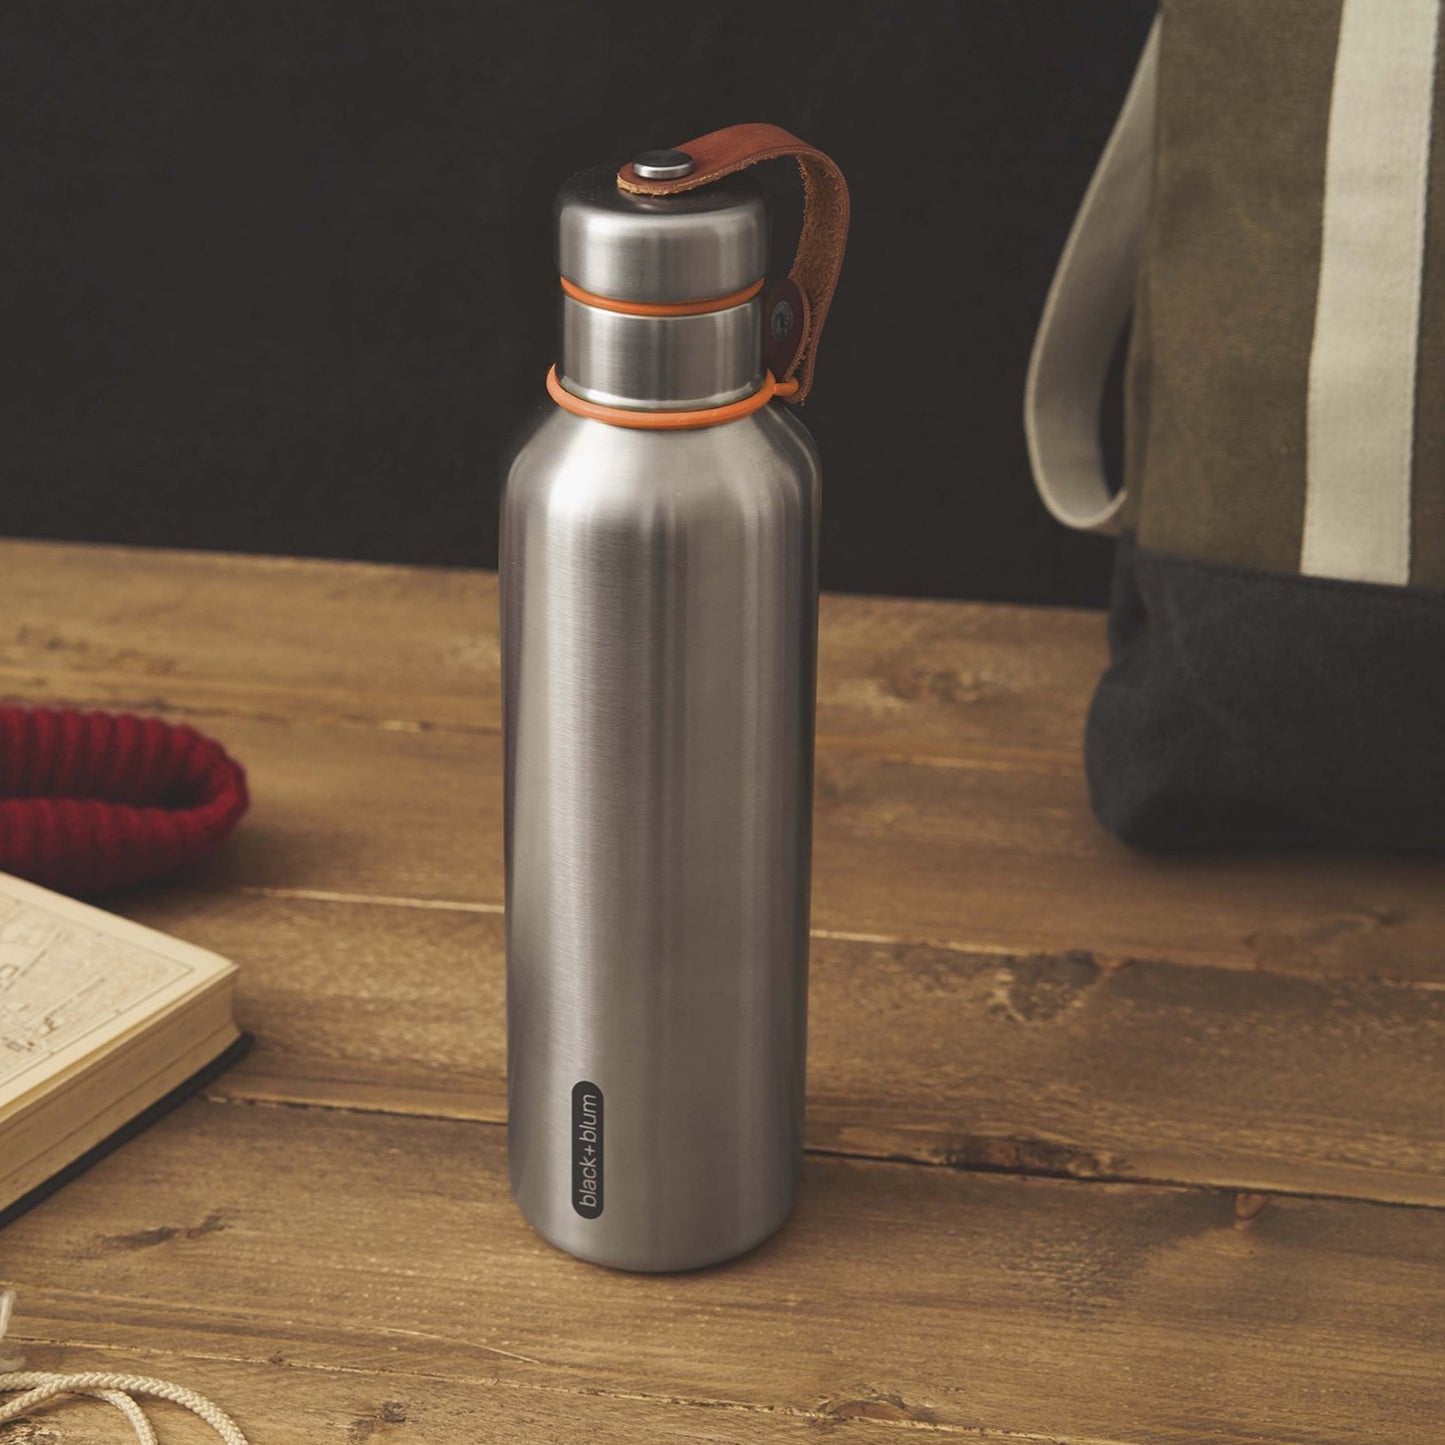 Insulated stainless steel water bottle with vegan leather accent and orange trim.  On wood table by bag and book